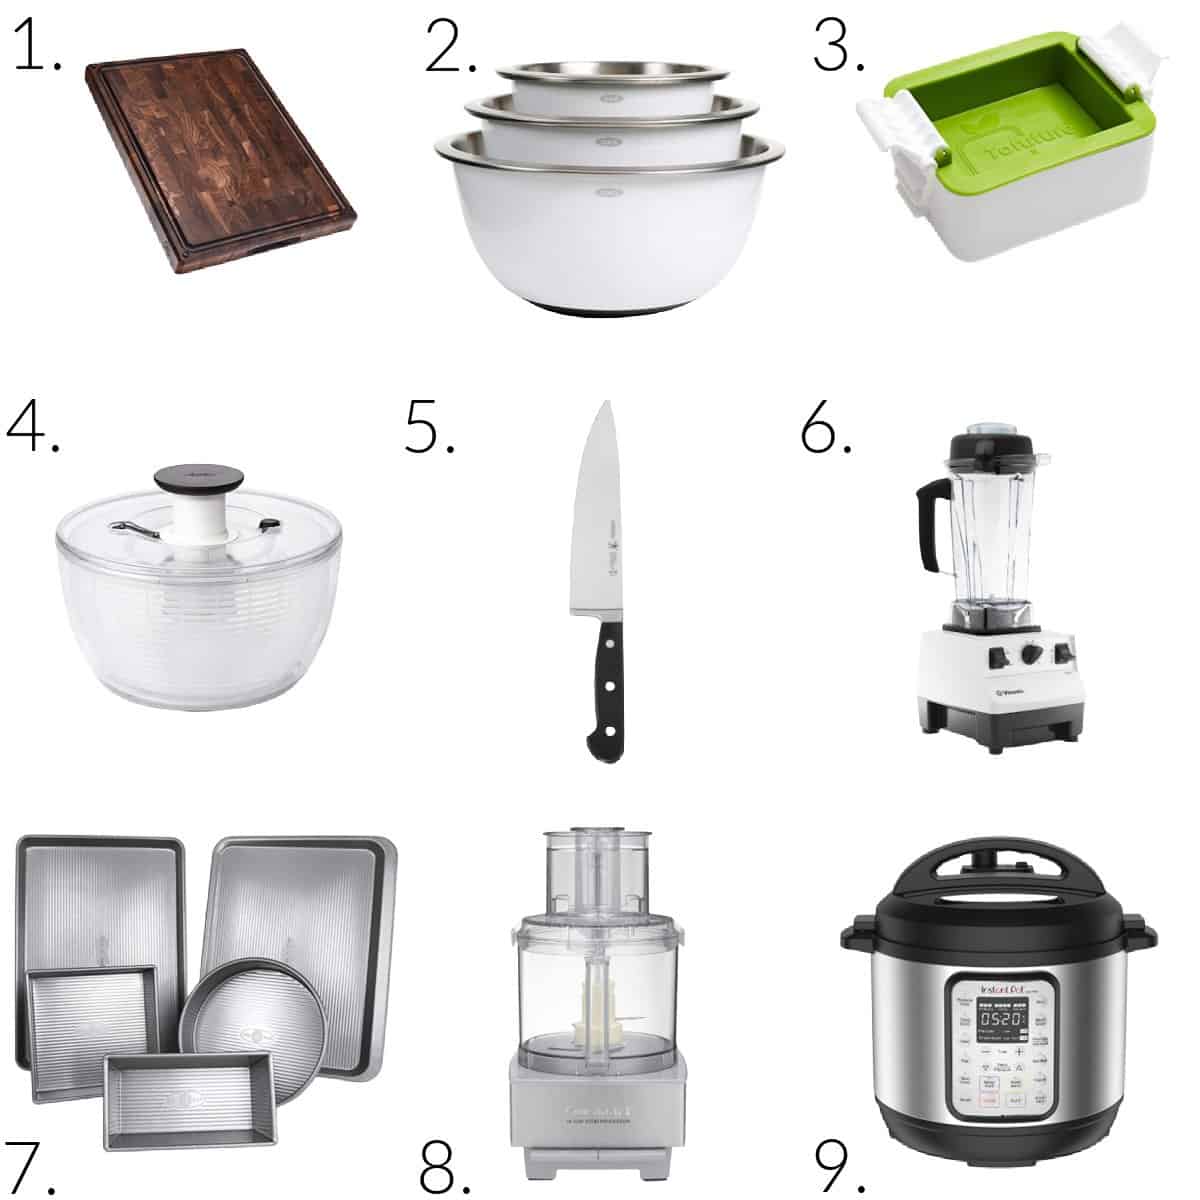 9 photo collage of vegan gift ideas for the kitchen.